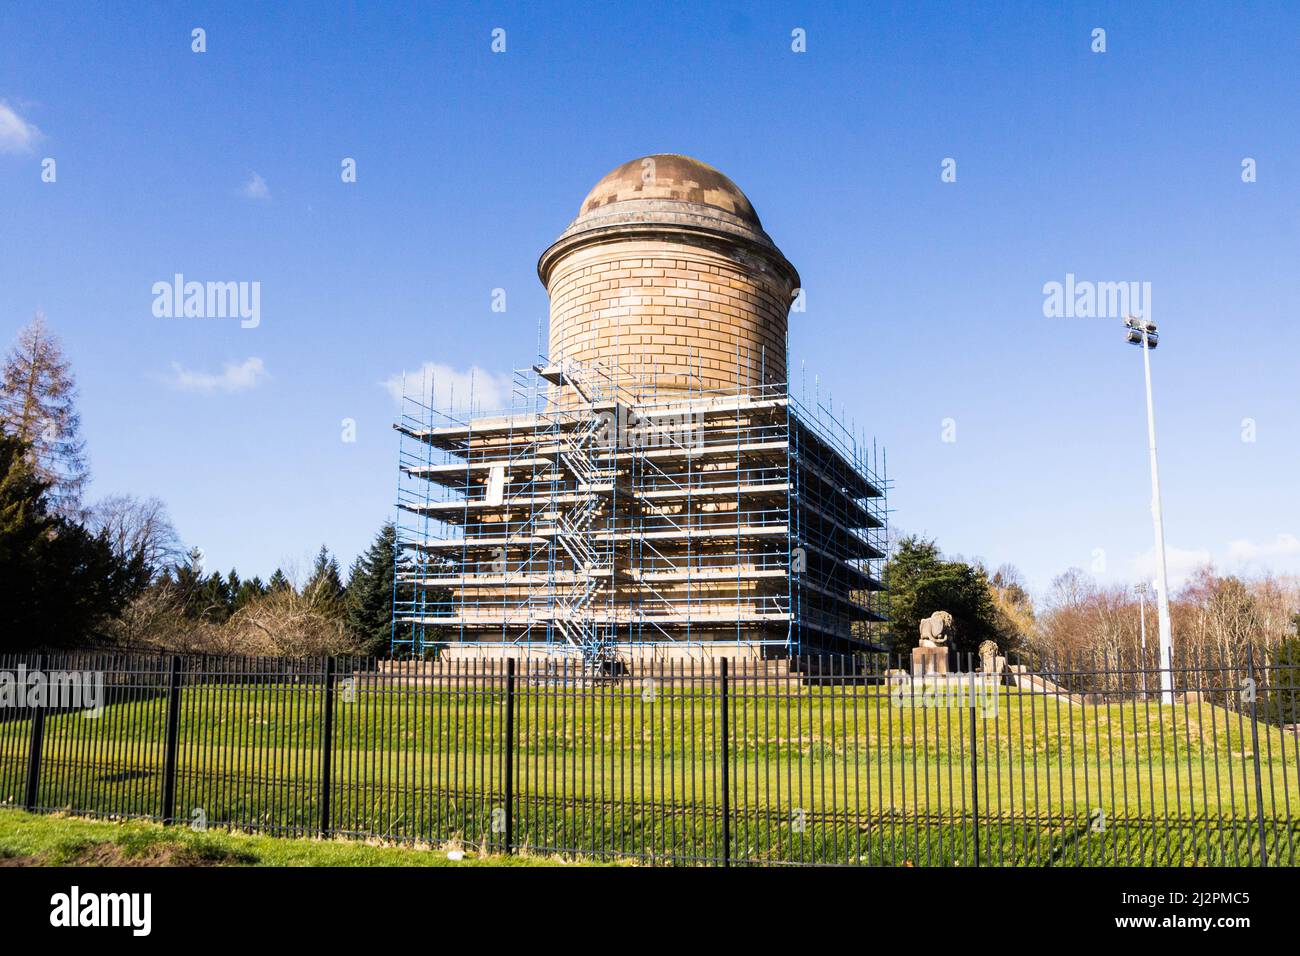 Mausoleum in Hamilton, Scotland with Scaffolding around for repair work to stop the deterioration of the building Stock Photo